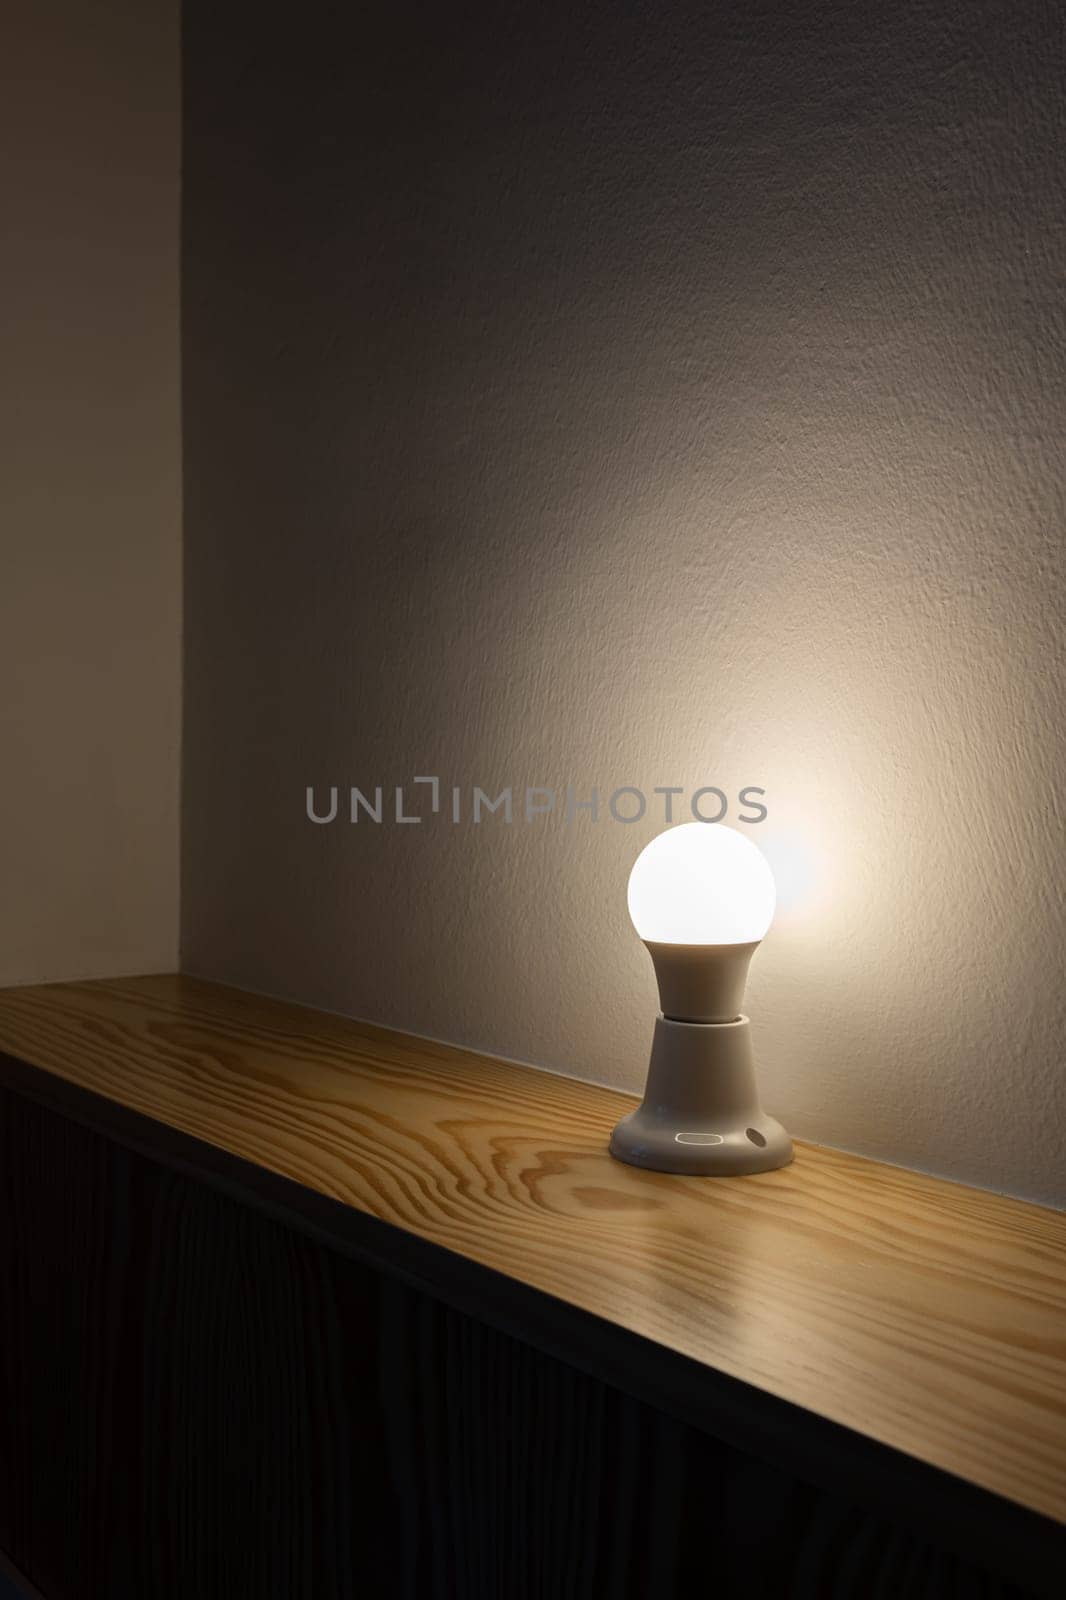 A light bulb on a wooden table in a dark room by apavlin